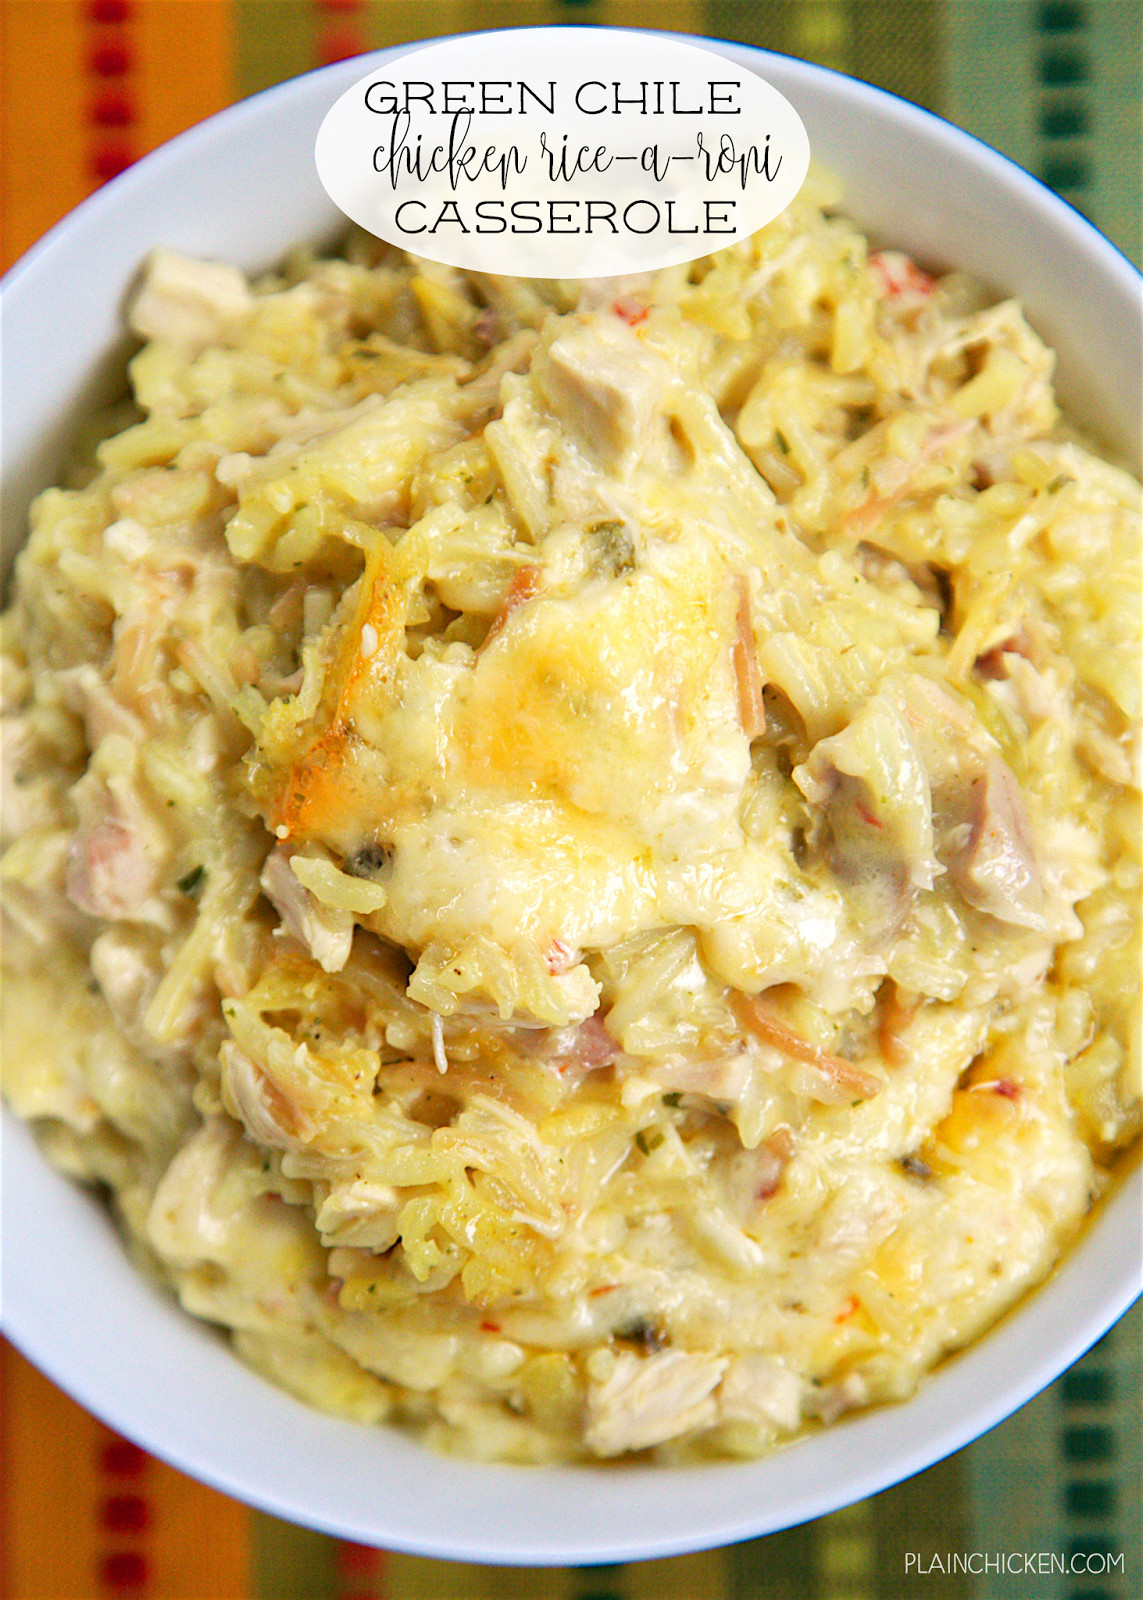 Chicken Casserole With Sour Cream And Rice
 Green Chile Chicken Rice A Roni Casserole